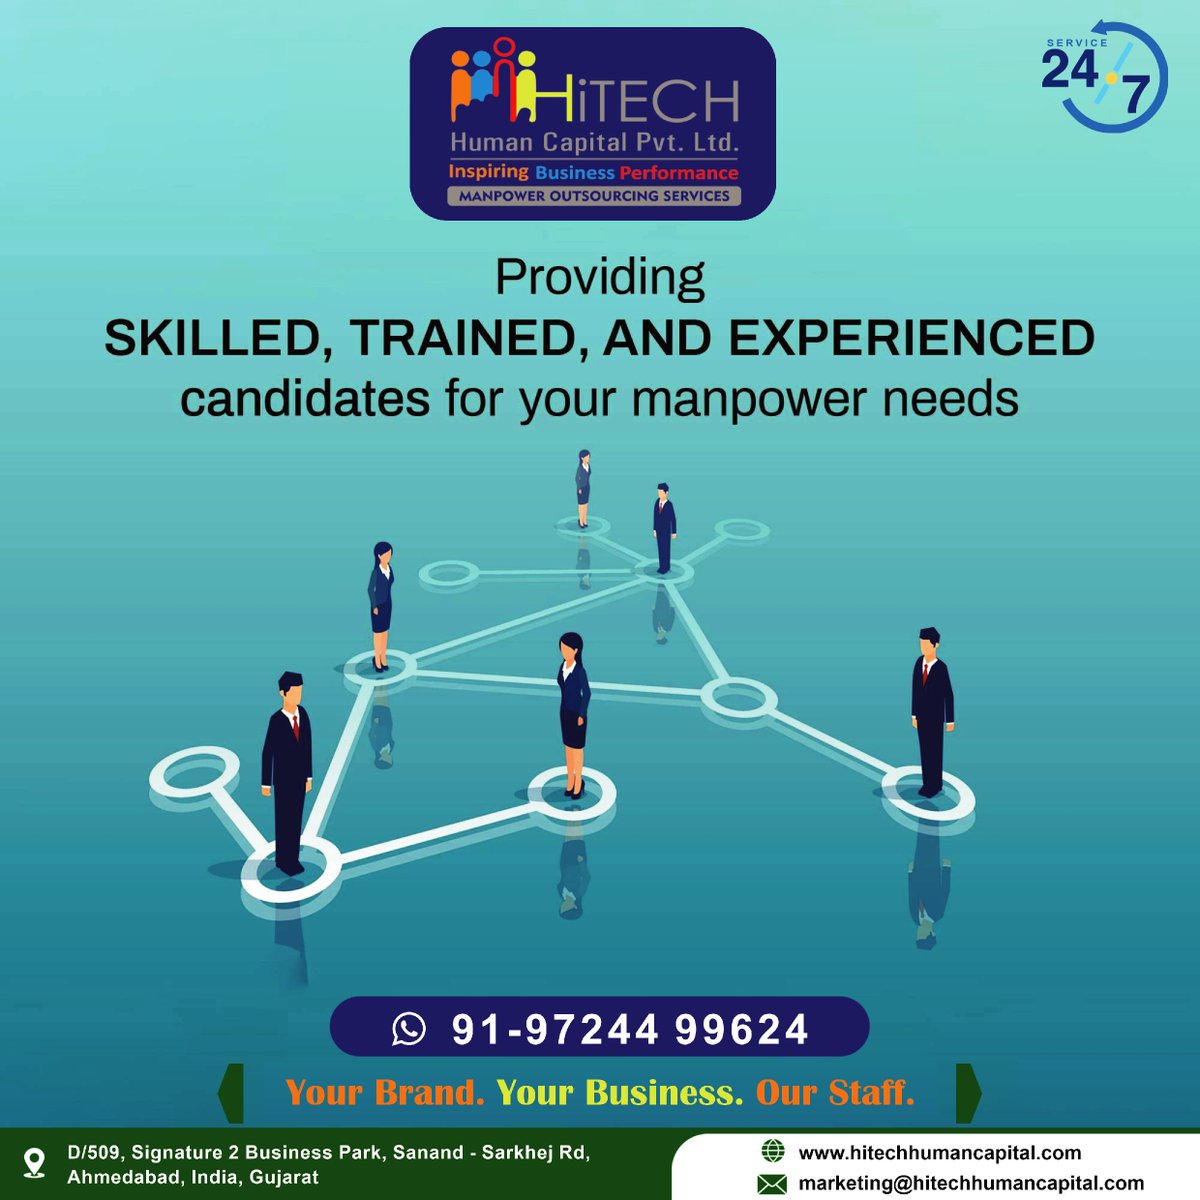 contact us:- +91 9327588538
visit our website:- lnkd.in/gS-jGHH
#ManpowerServices #StaffingSolutions #Recruitment #TemporaryStaffing #PermanentStaffing #ProjectBasedStaffing #TalentAcquisition #HumanResources #EmploymentServices
#JobPlacement #WorkforceDevelopment